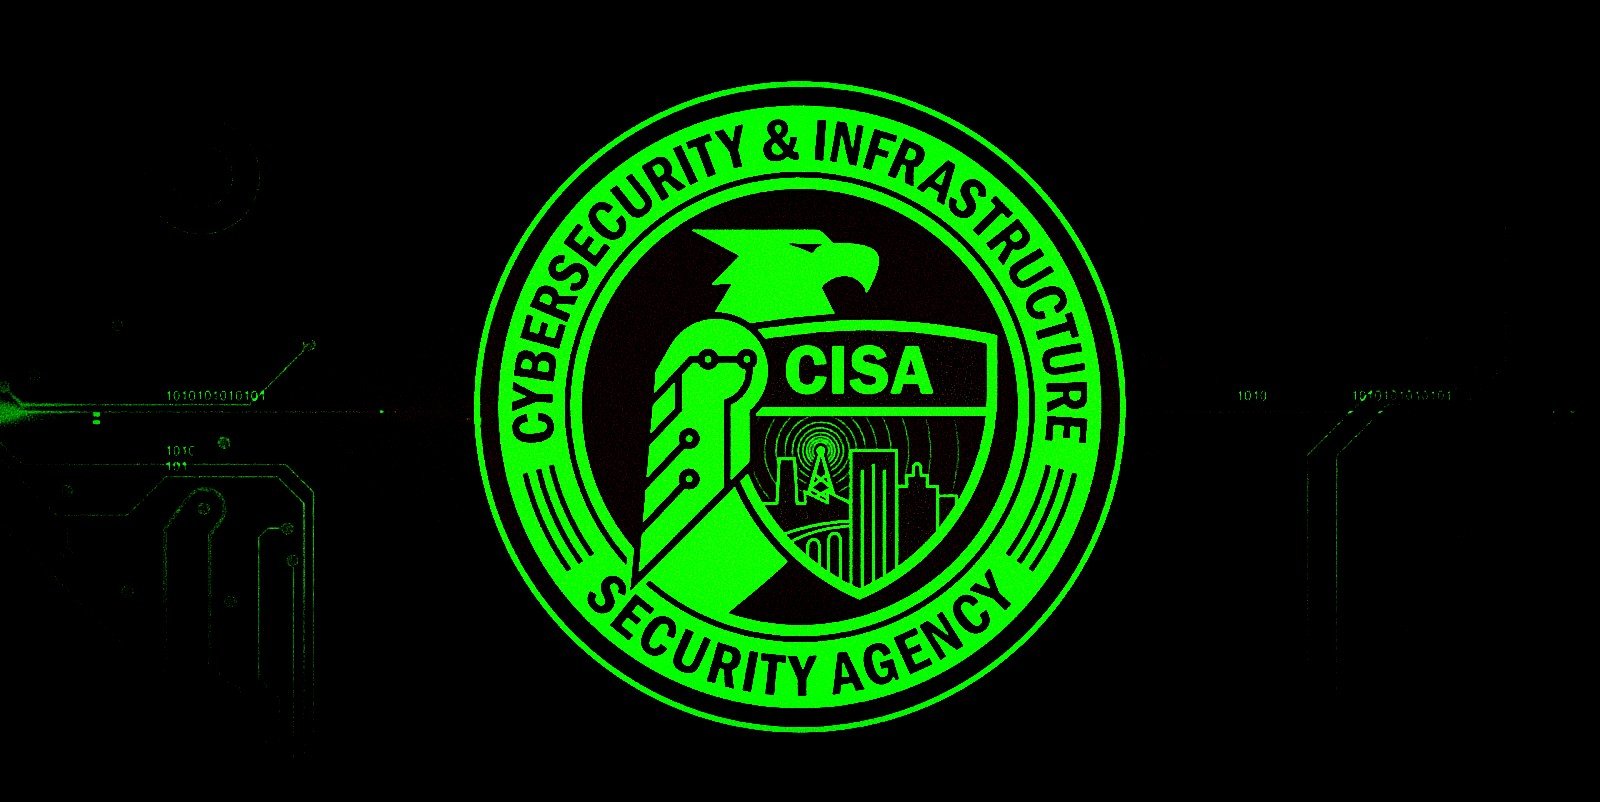 CISA orders federal agencies to patch actively exploited Windows bug